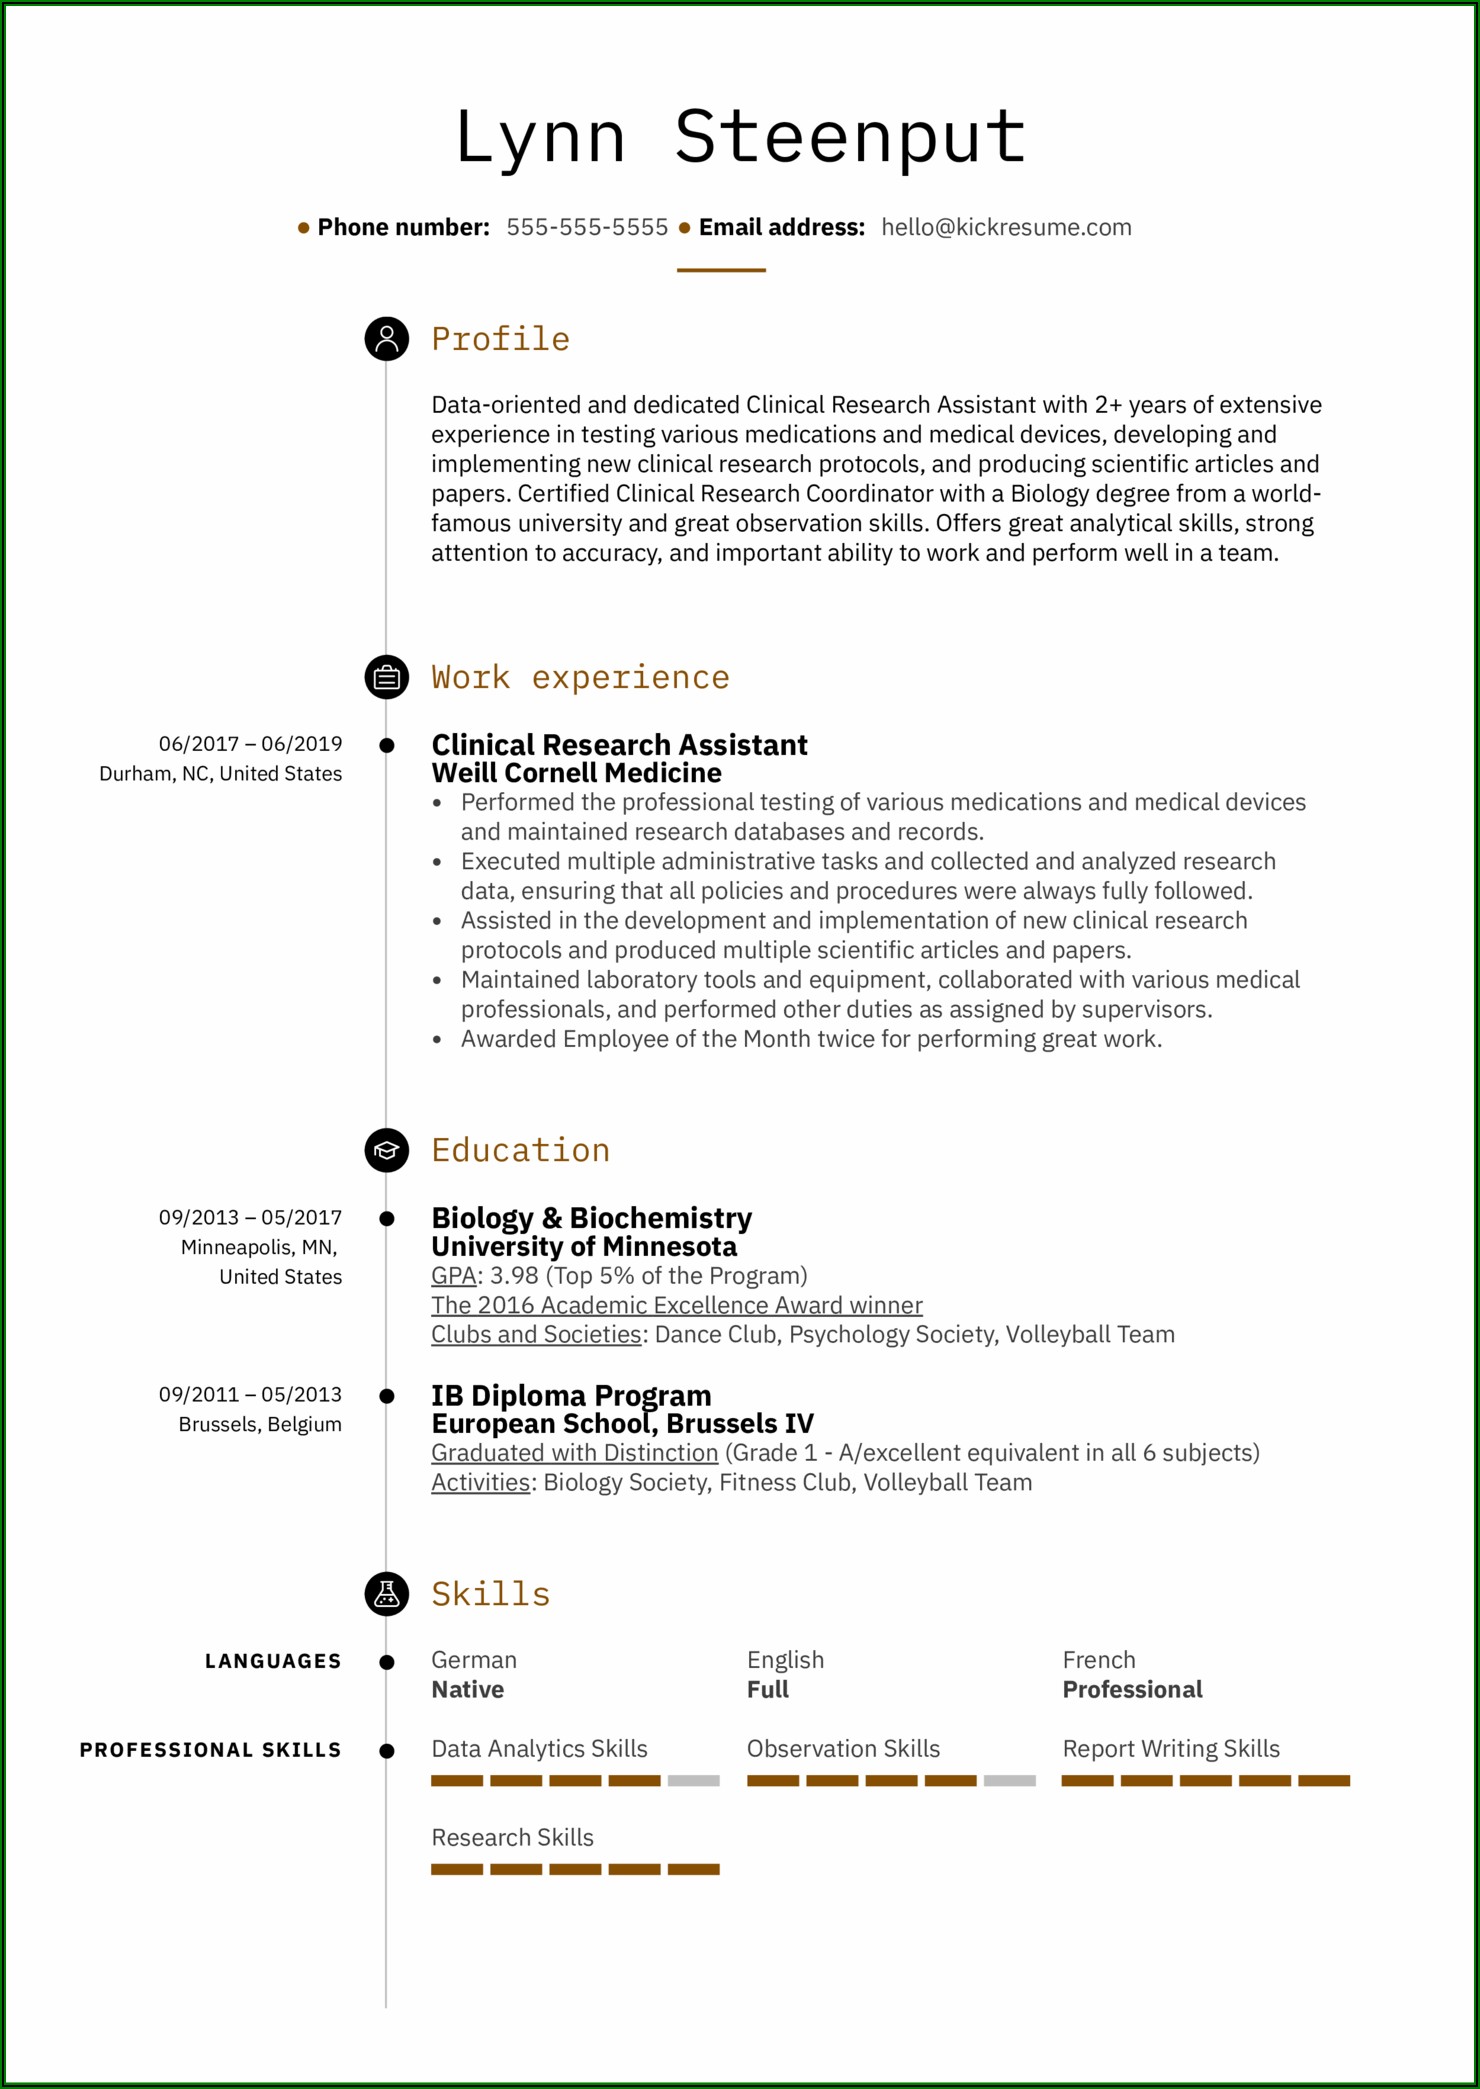 Resume Skills For Medical Research Assistant